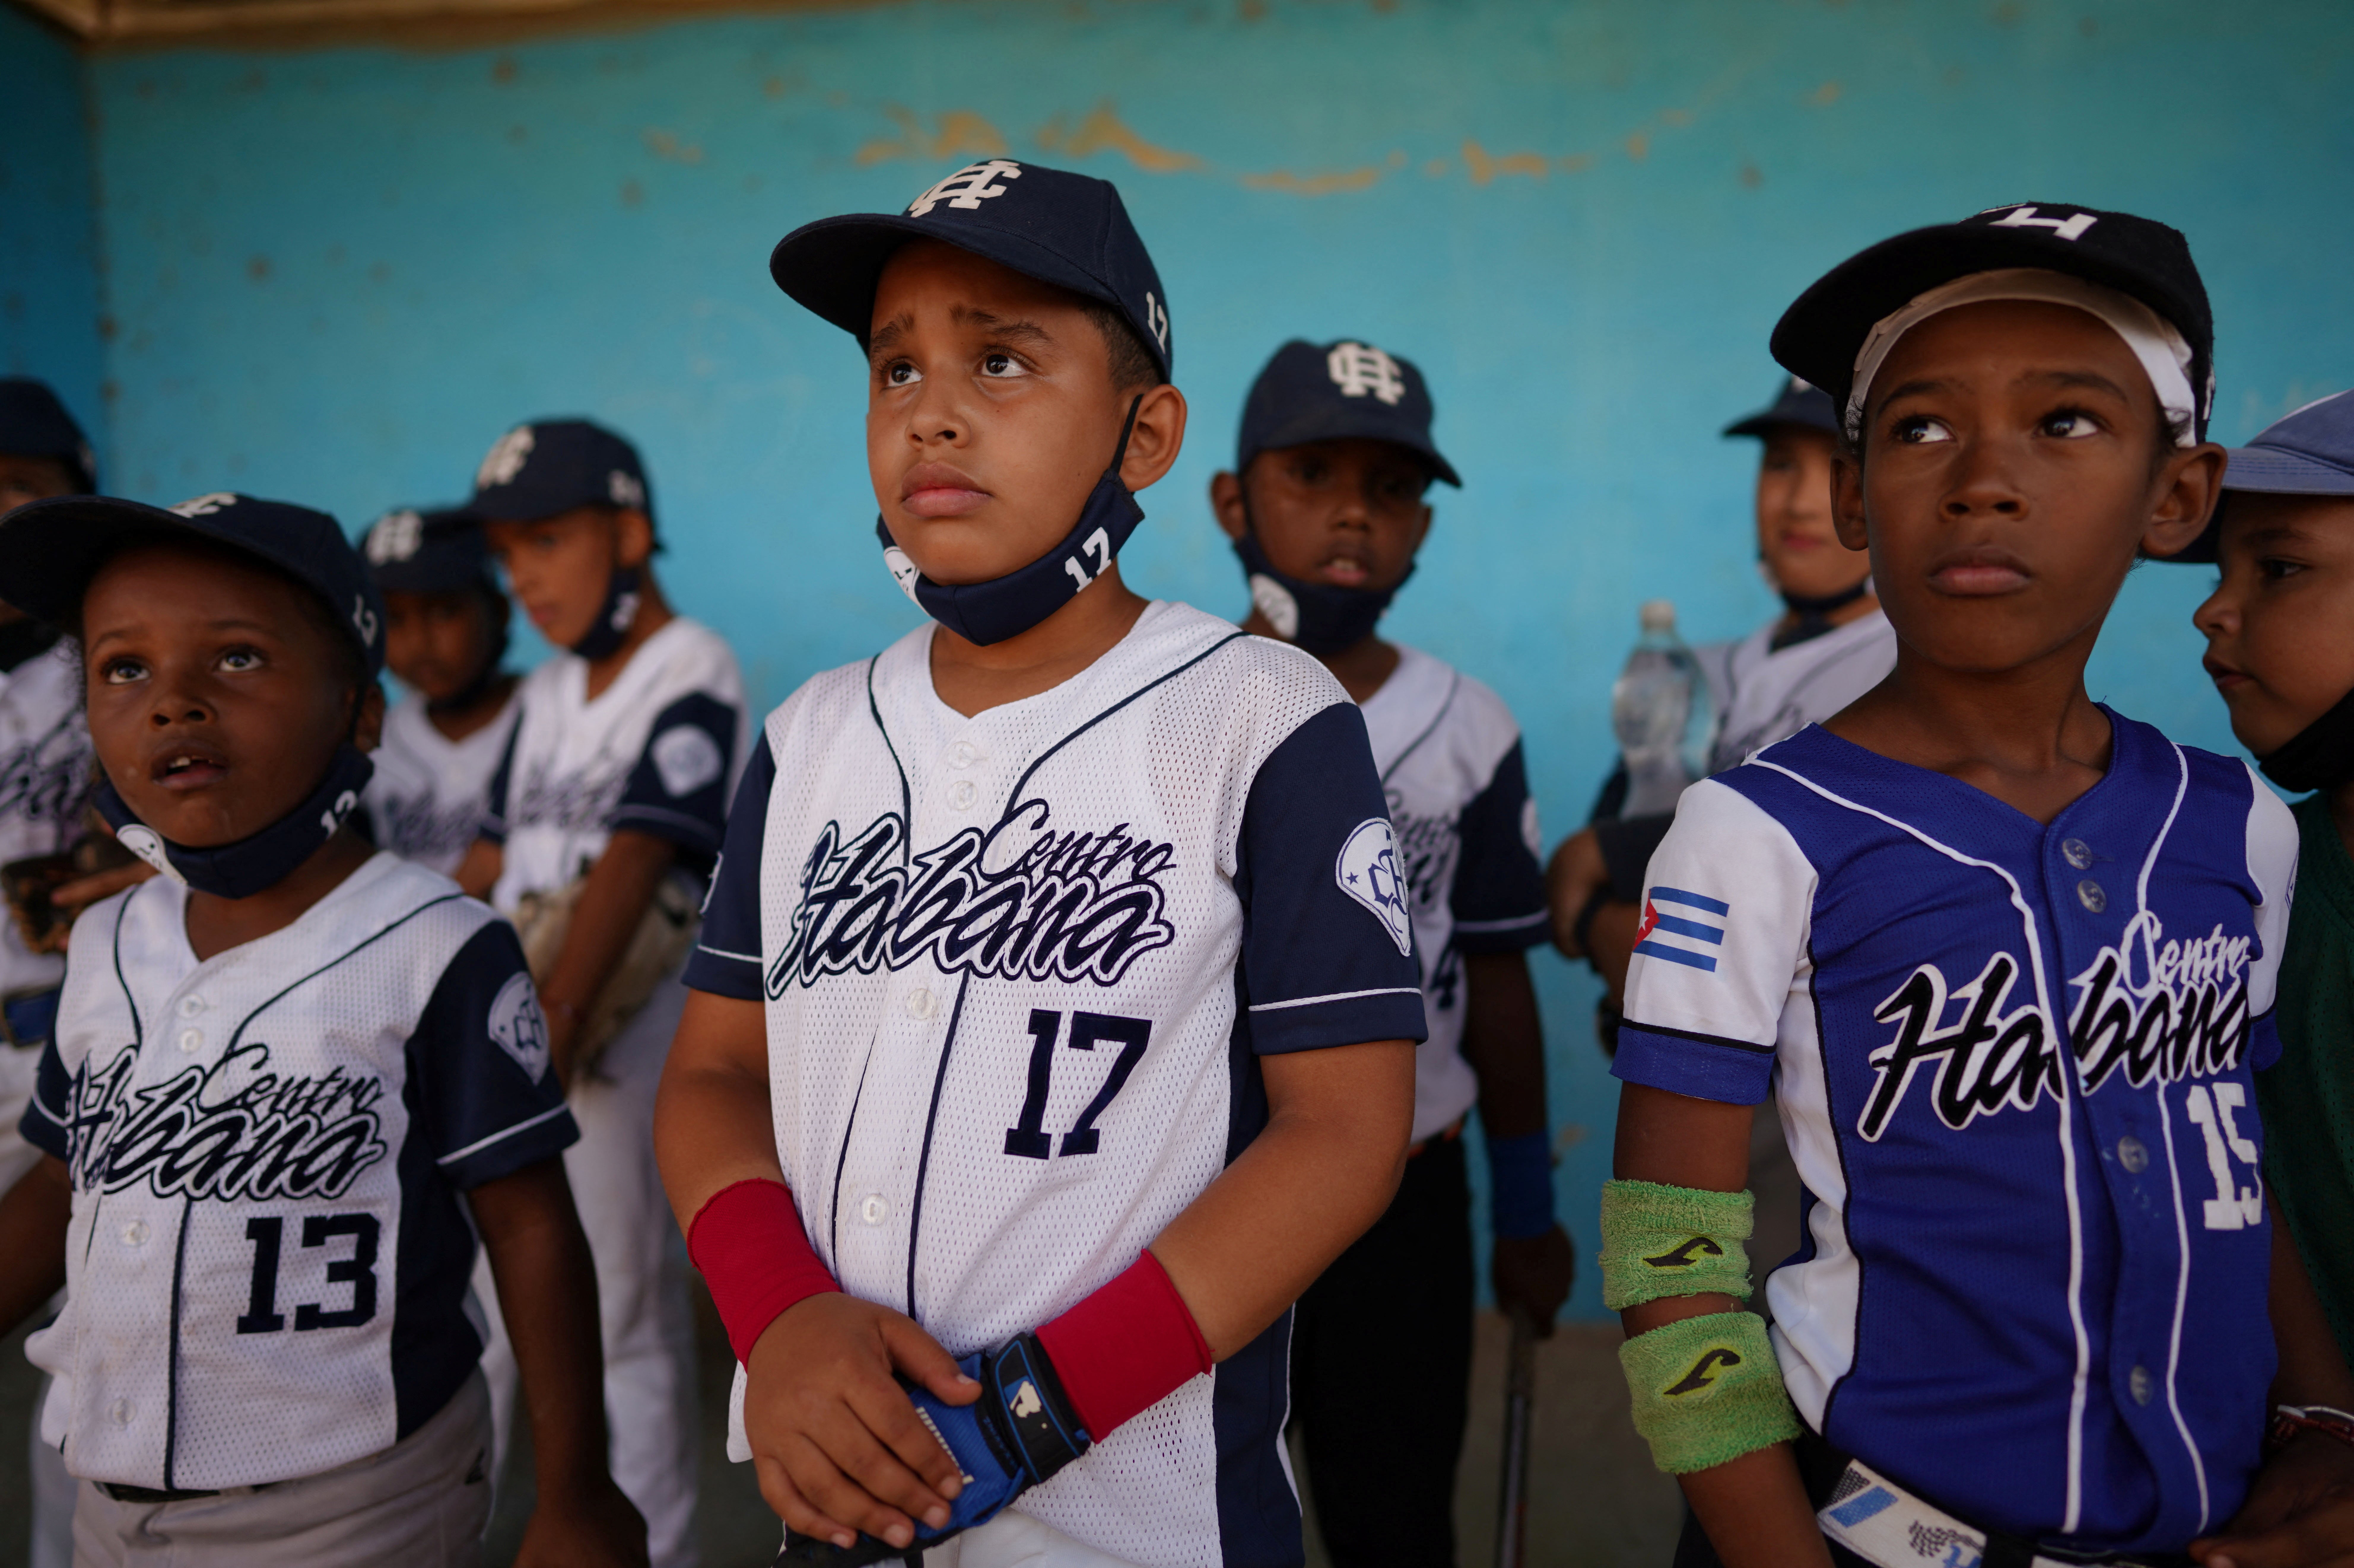 Children from the Downtown Havana baseball team listen to instructions from a coach during a match